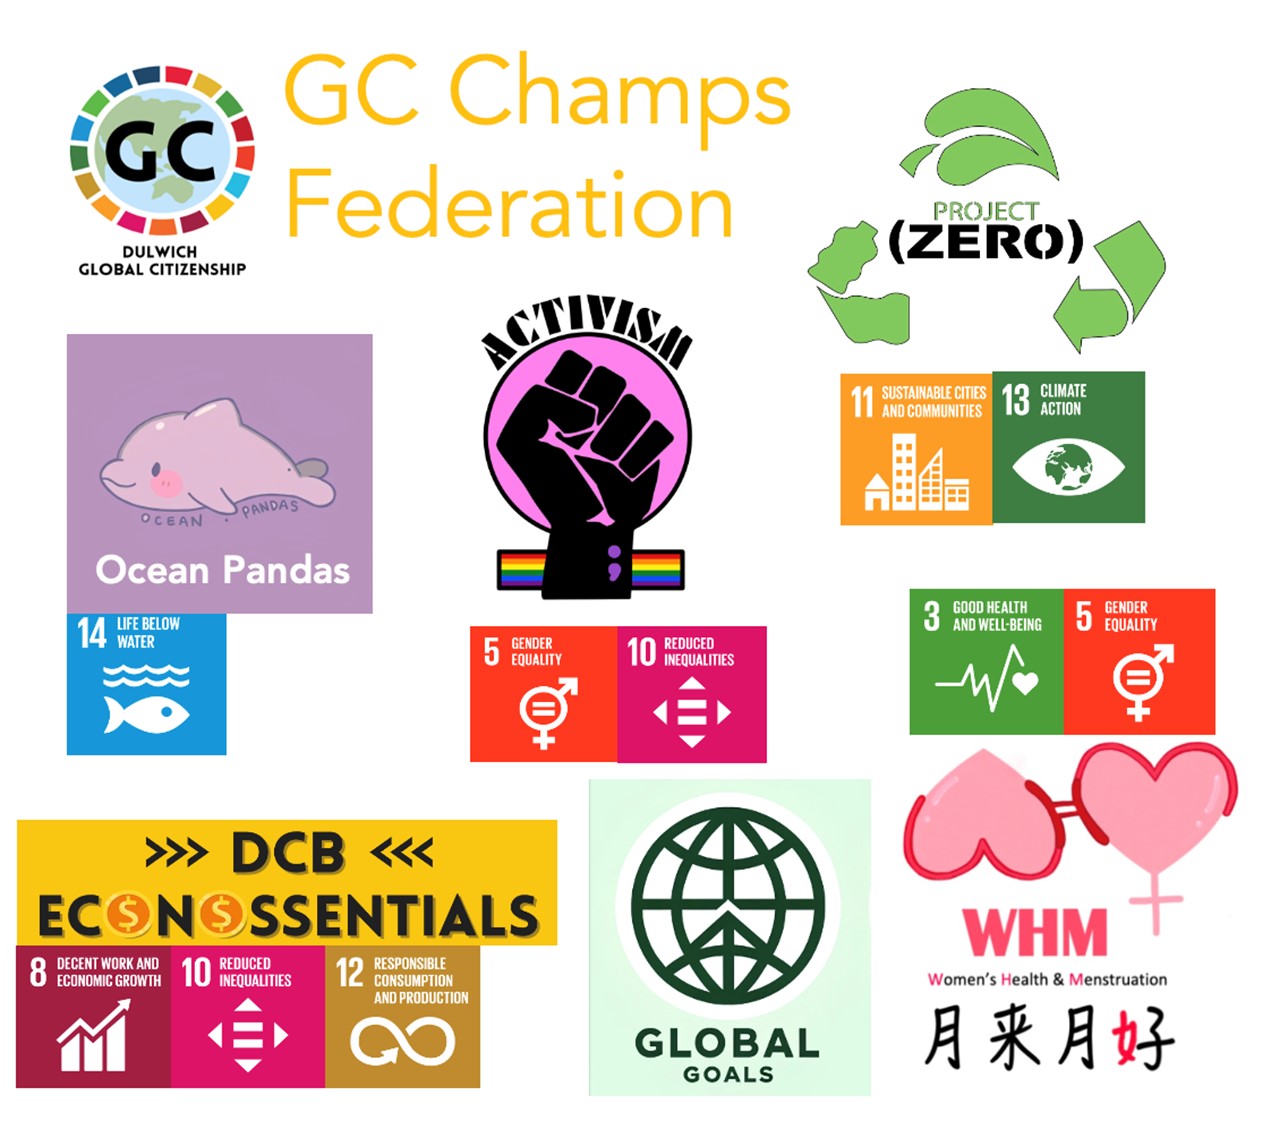 GC Champs Federation